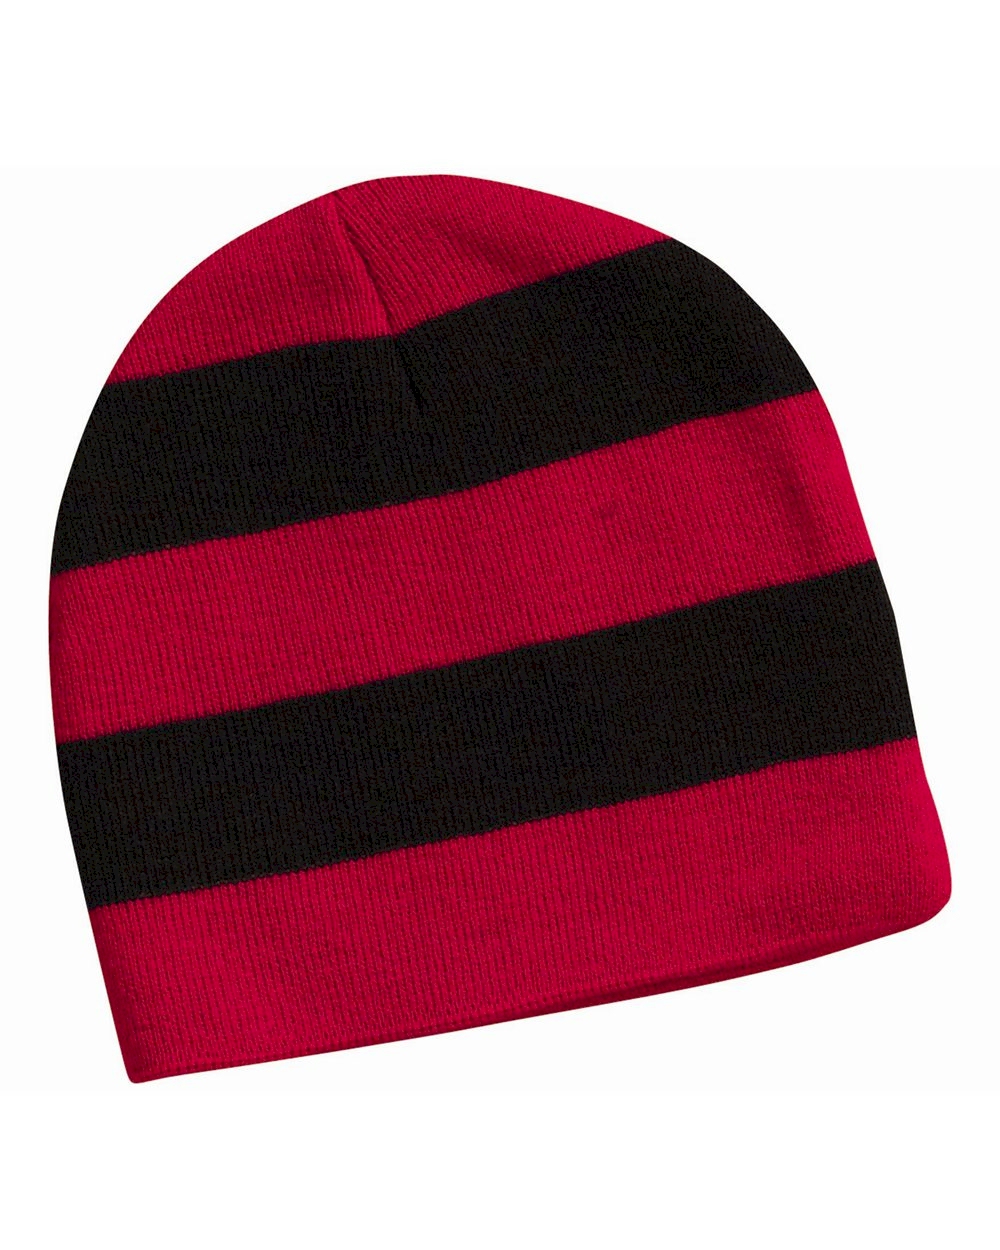 Rugby Striped Knit Beanie Embroidery Blanks - Red/Black